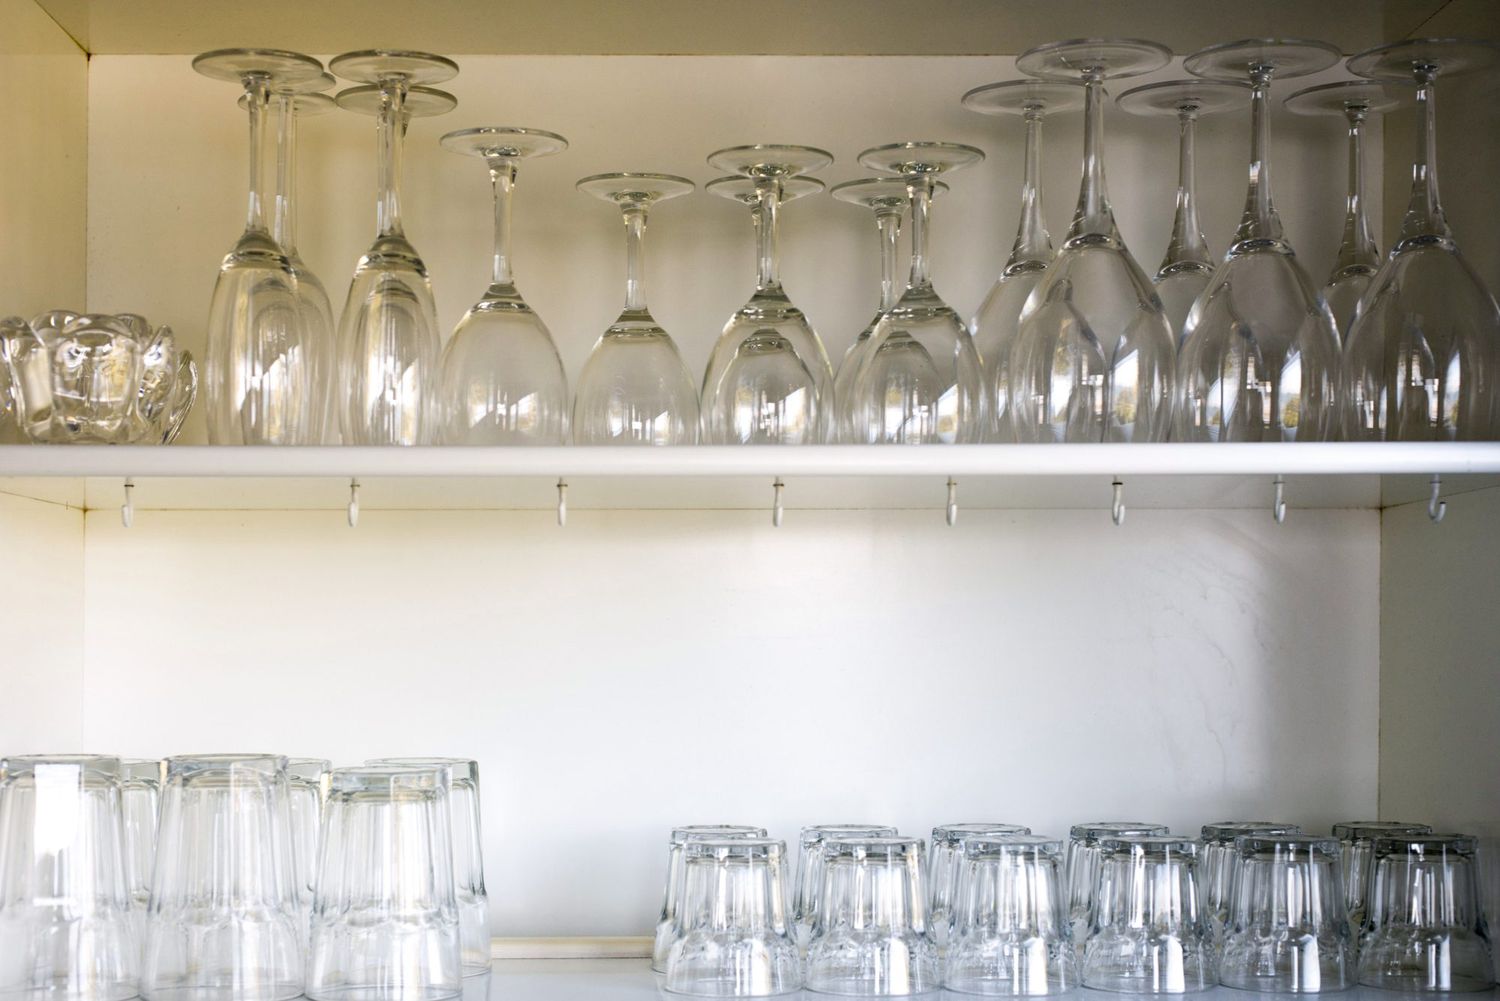 Clean glassware neatly arranged on open white wooden shelves